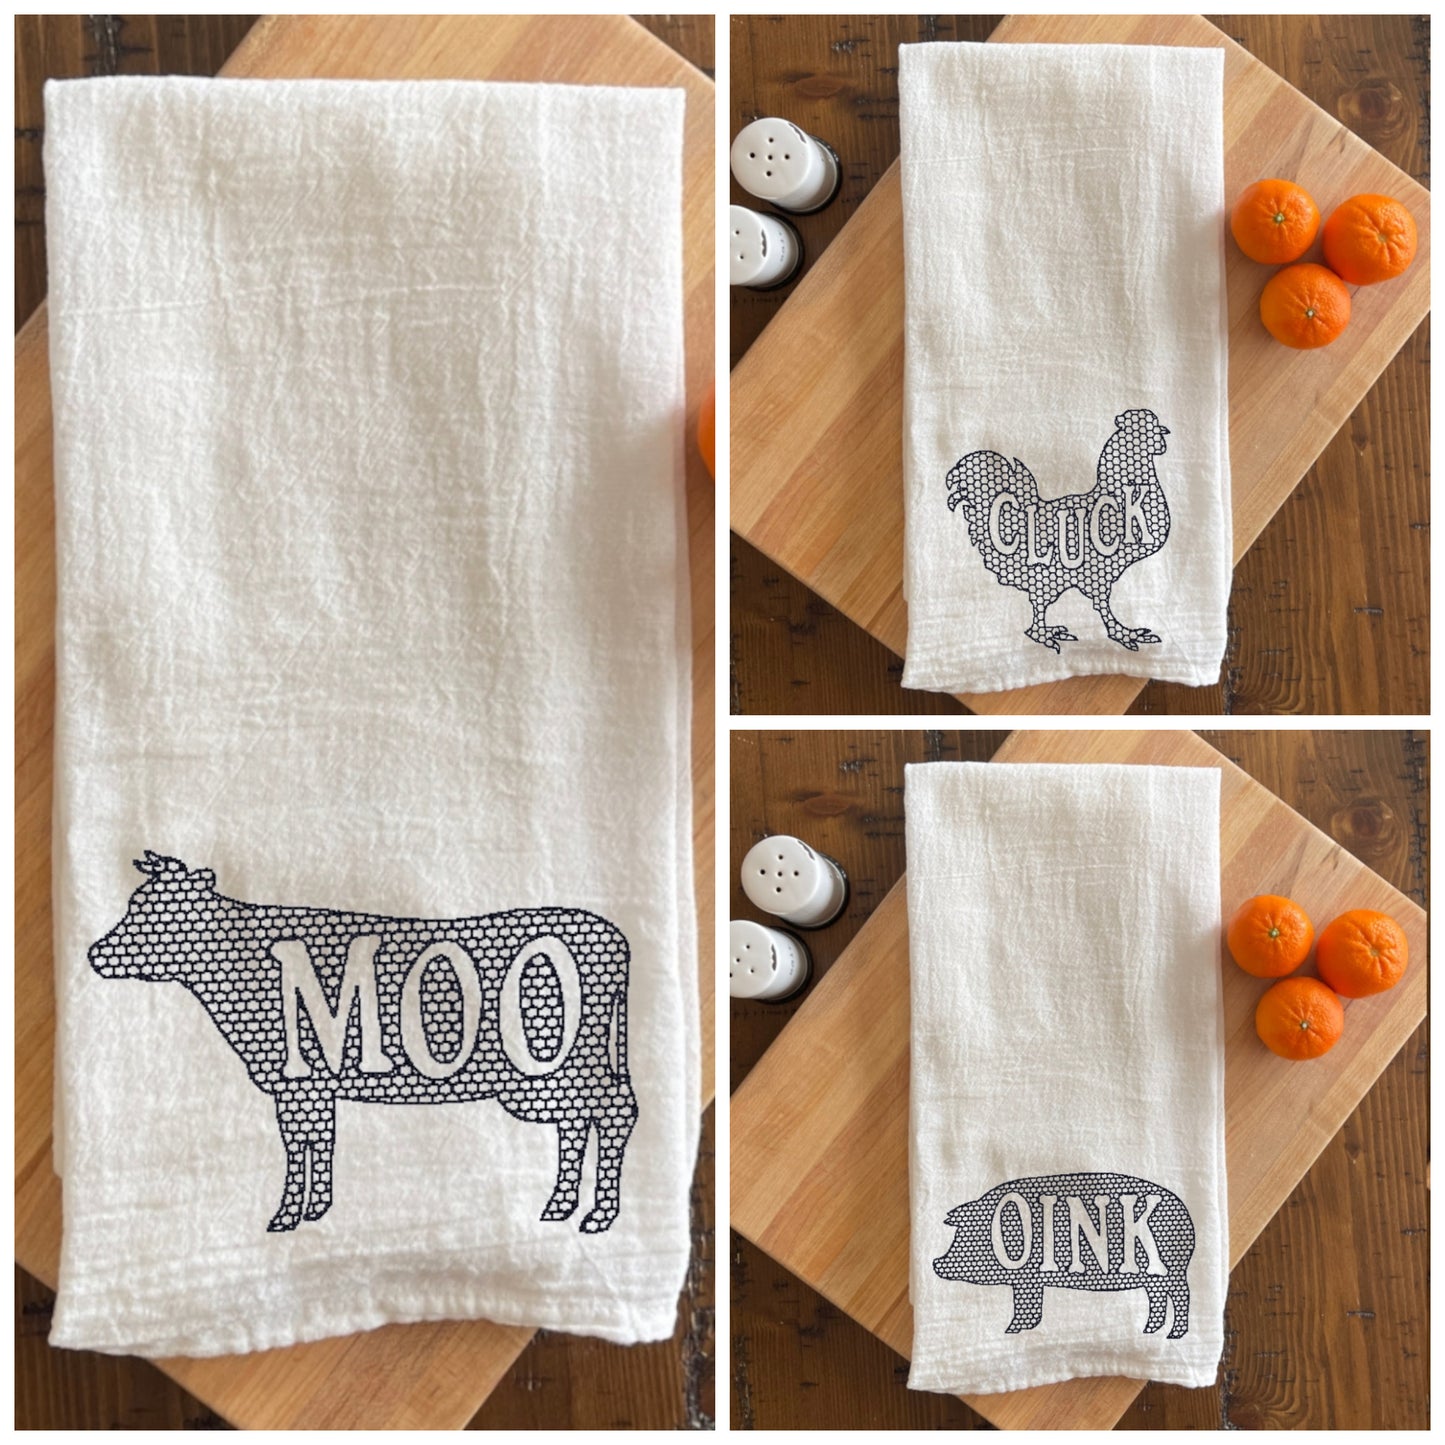 Oink Pig- Embroidered White Tea Towel - Farm Animals